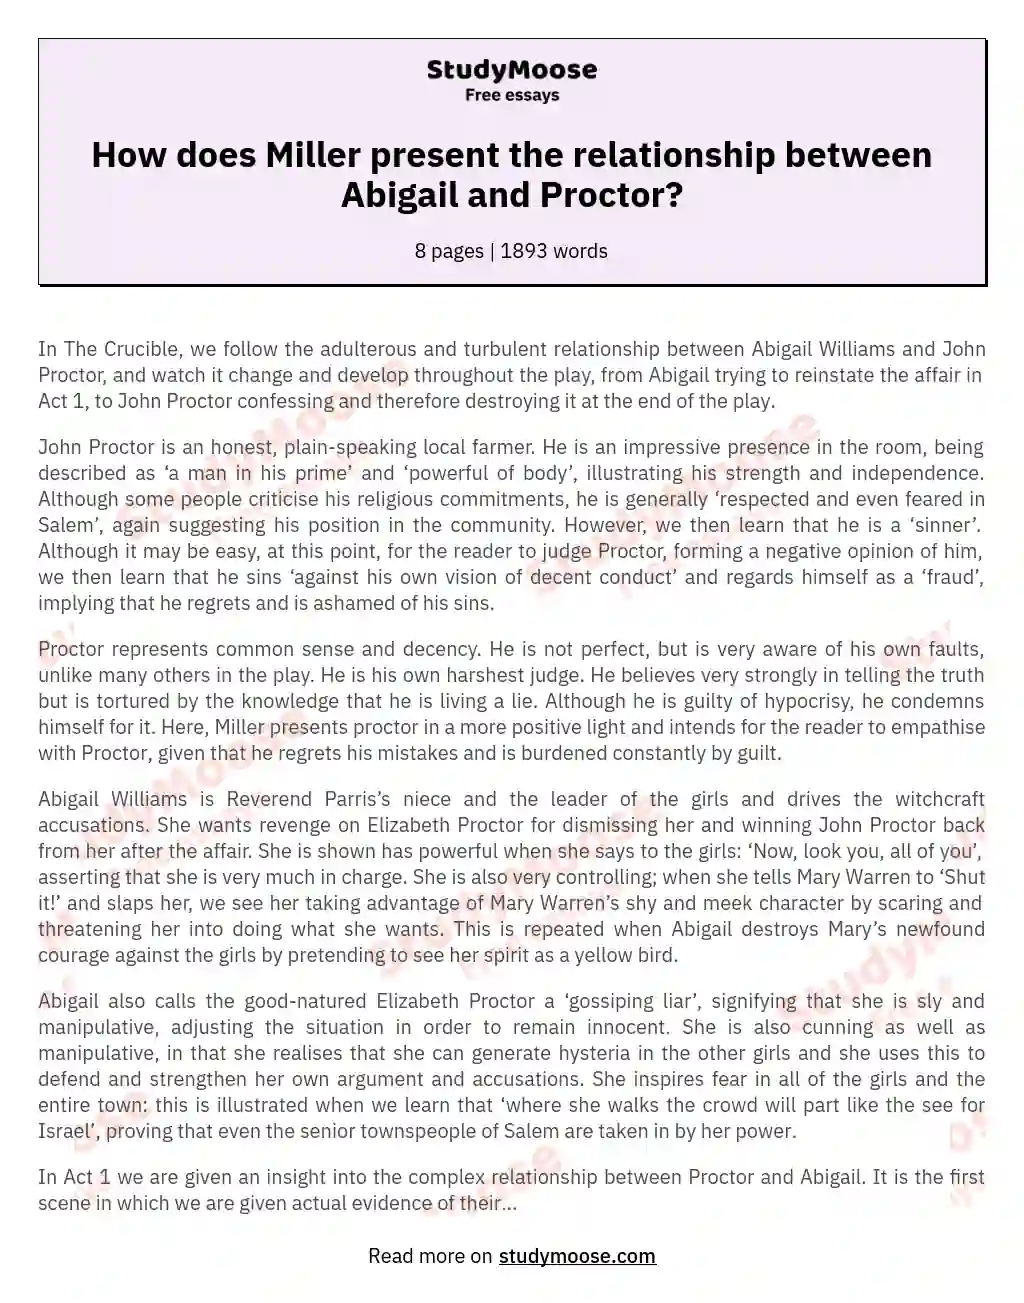 How does Miller present the relationship between Abigail and Proctor? essay